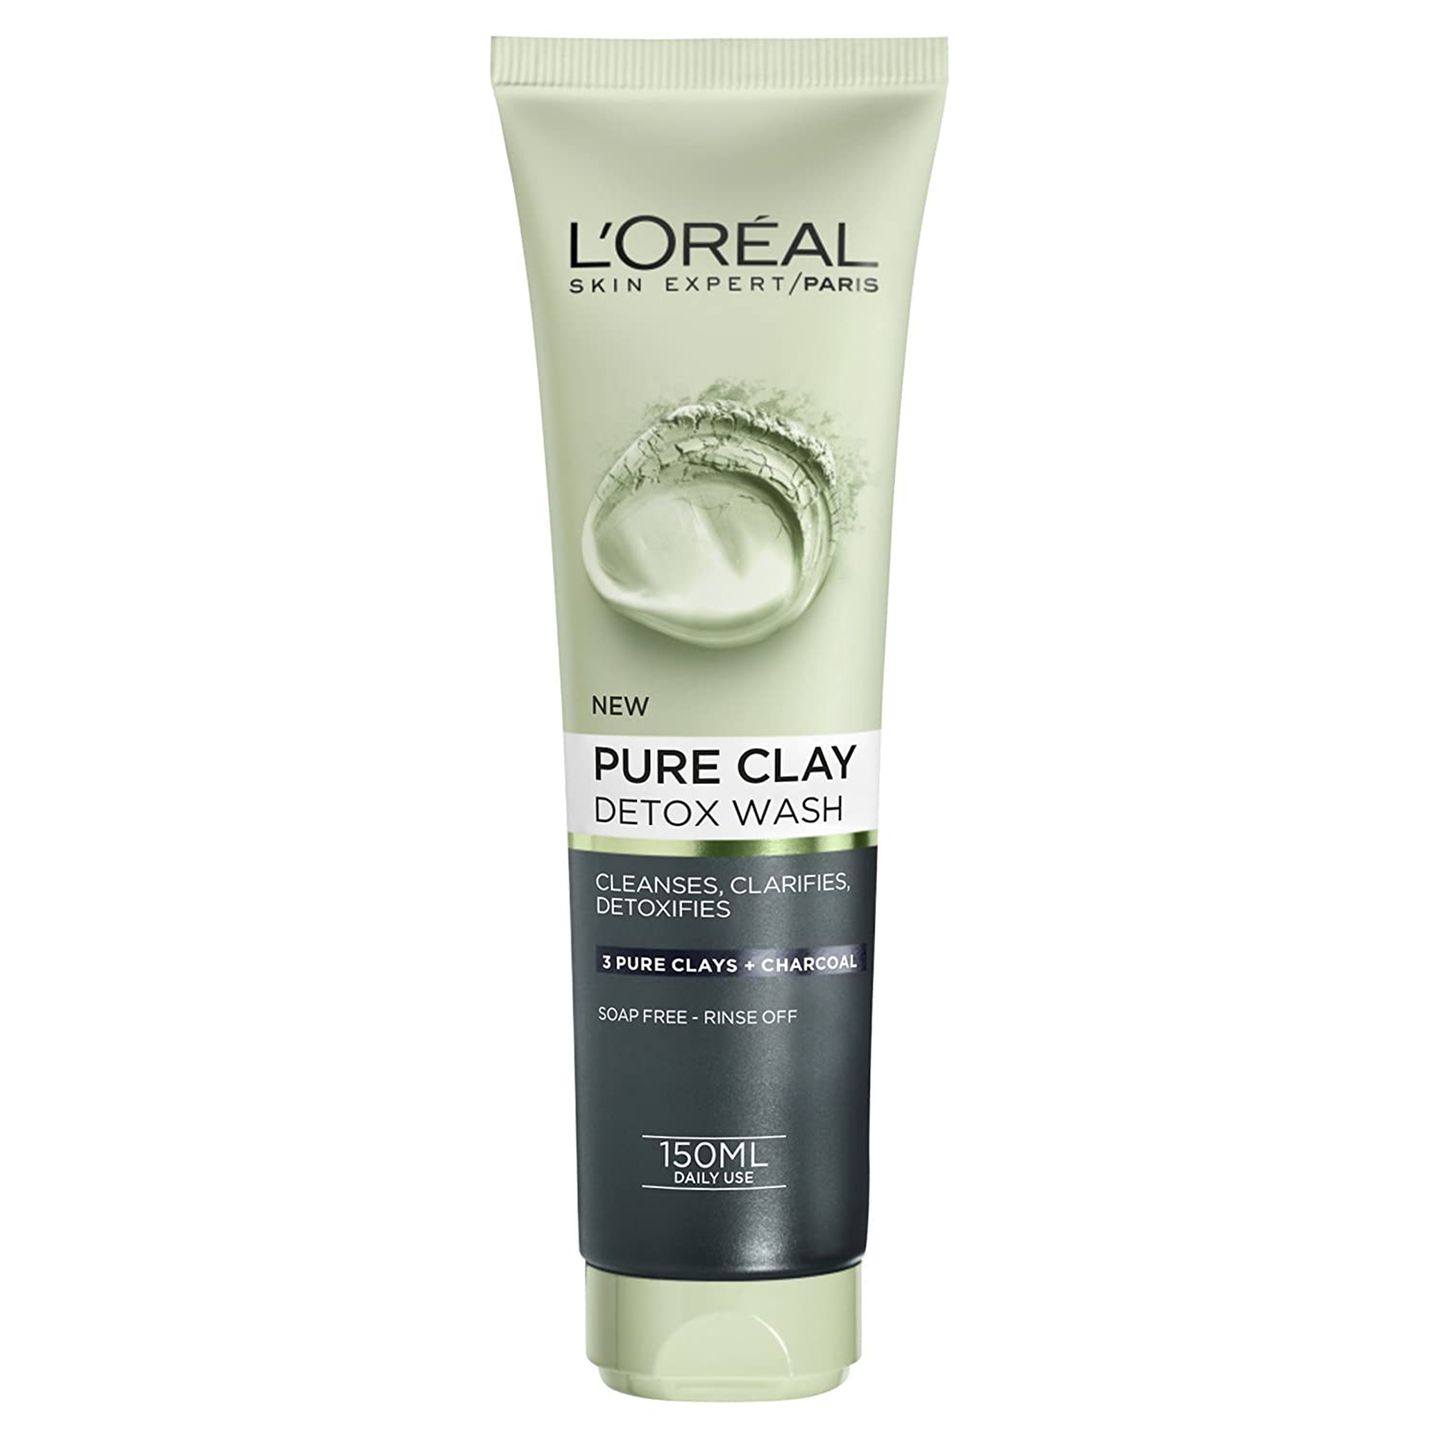 Pure Clay Black Face wash gel from L'Oreal "loading =" lazy